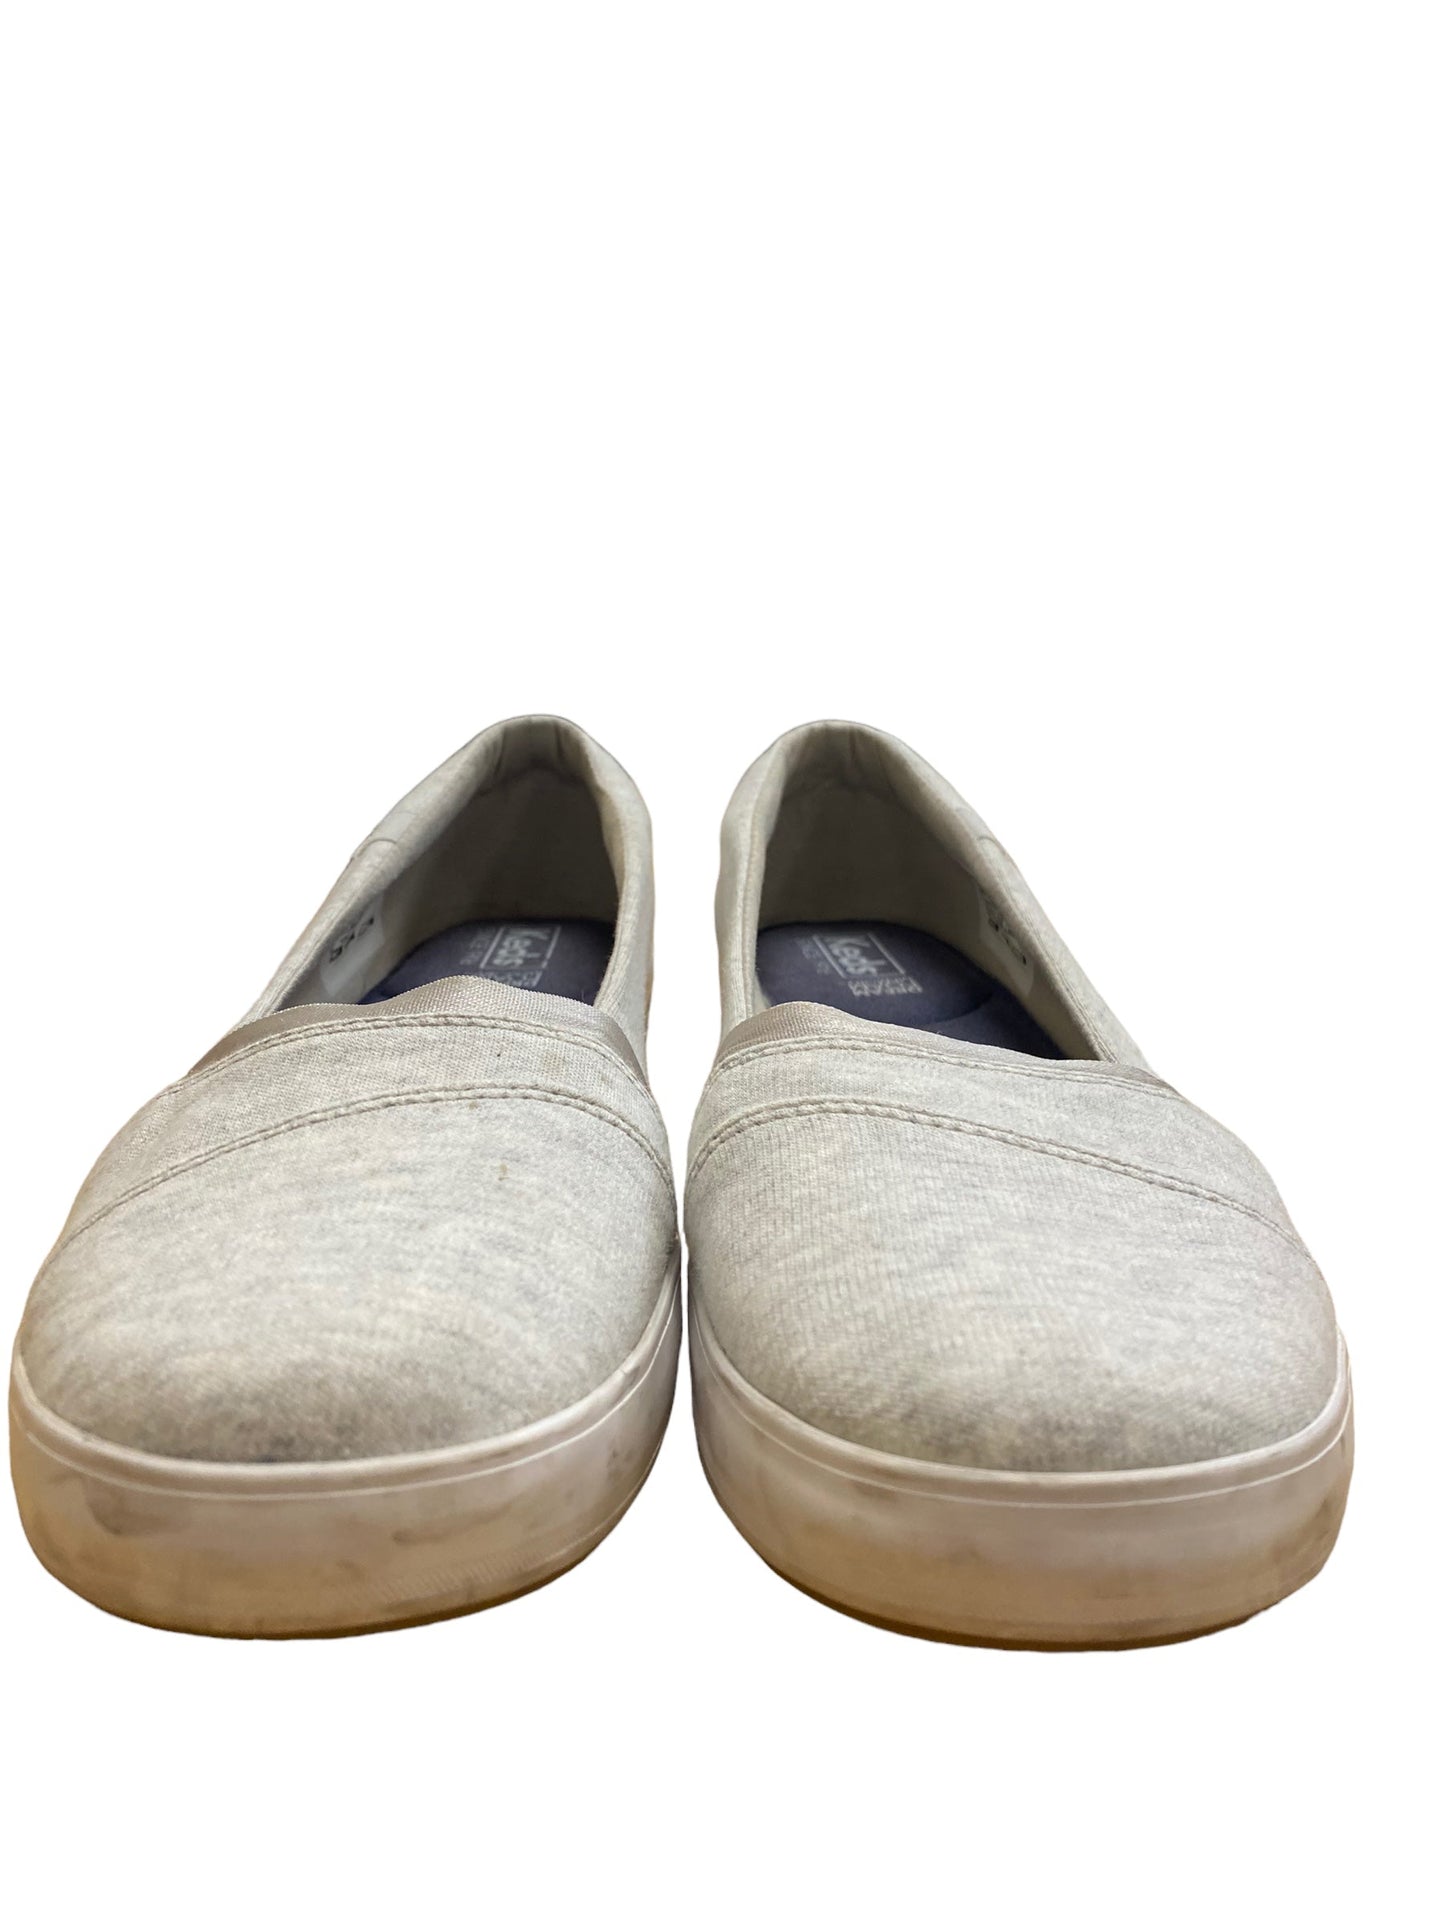 Shoes Flats Boat By Keds  Size: 8.5